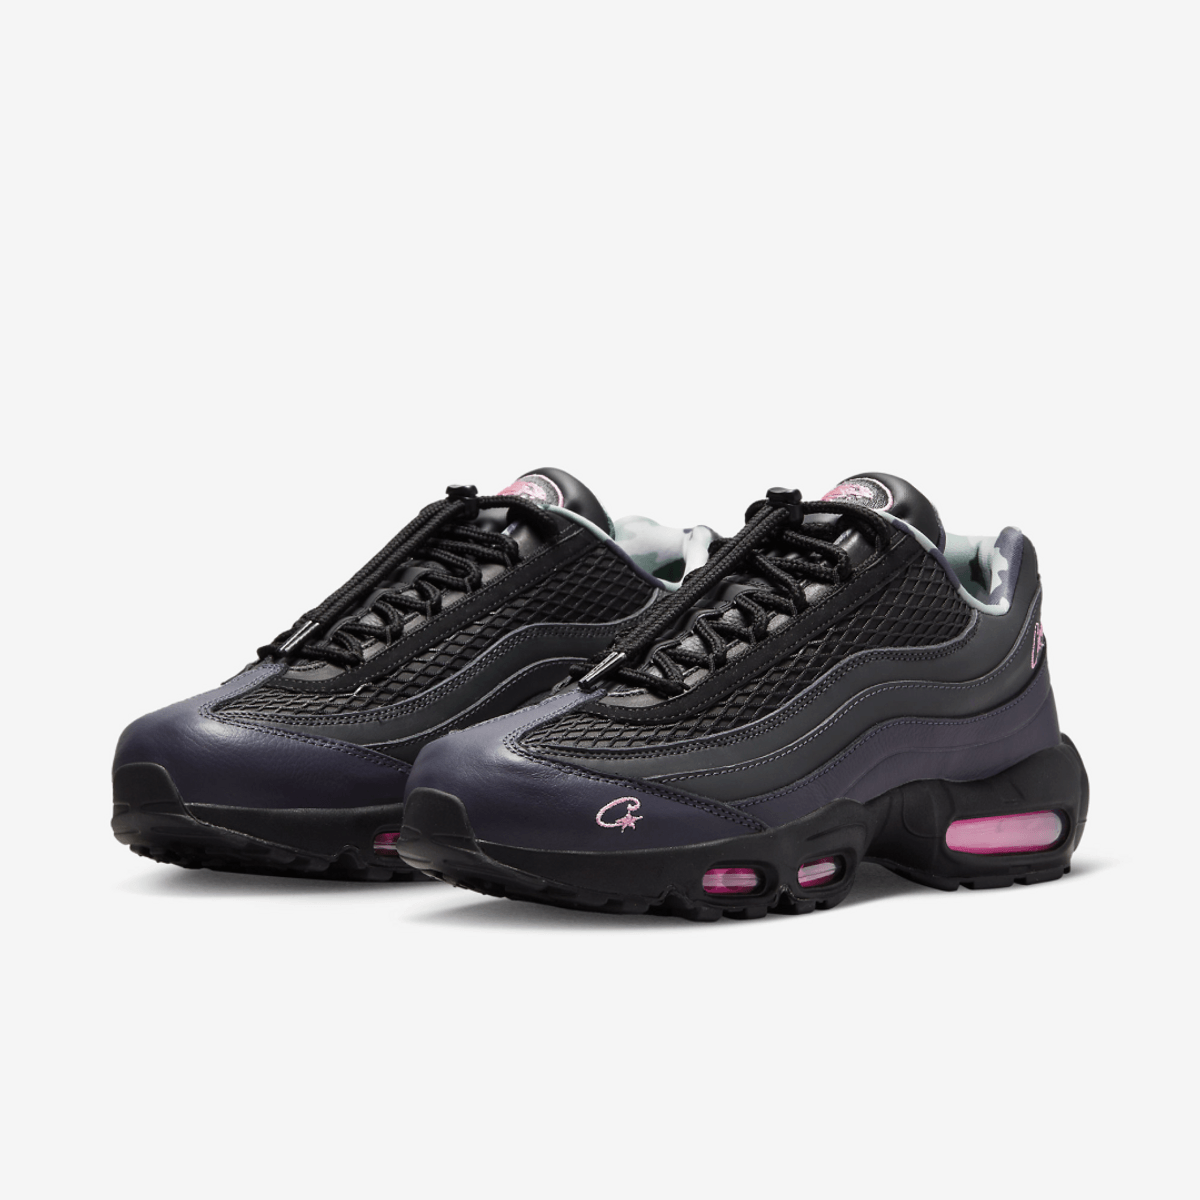 London-Based Streetwear Brand Corteiz Teams Up With Nike For The Air Max 95 "Gridiron Pink Beam"